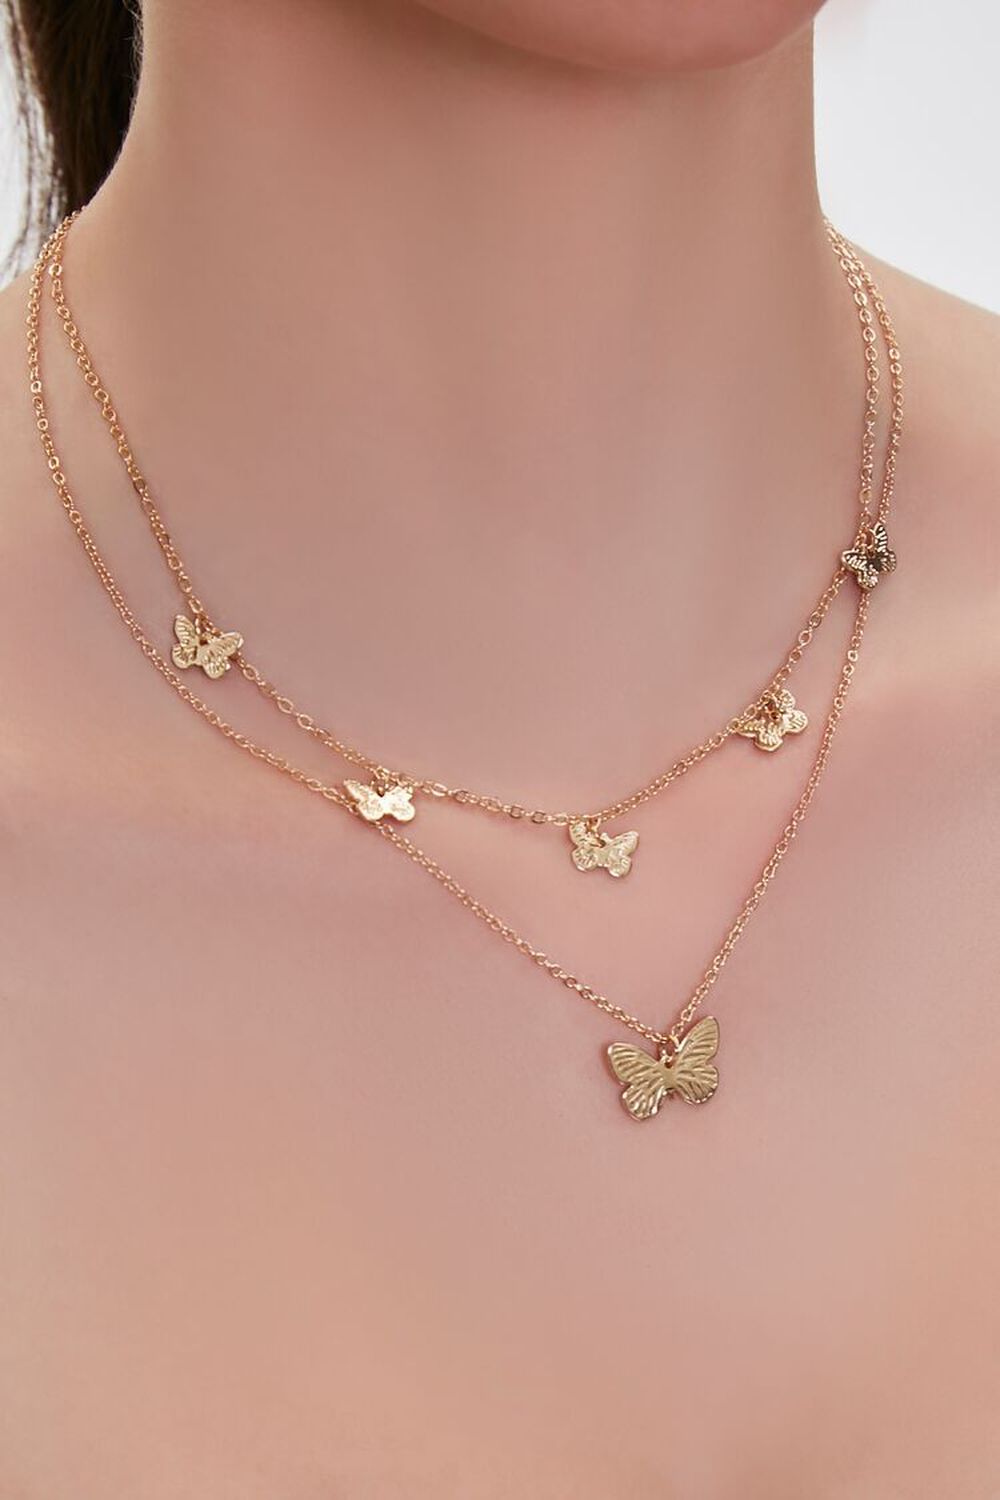 GOLD Butterfly Layered Necklace, image 1